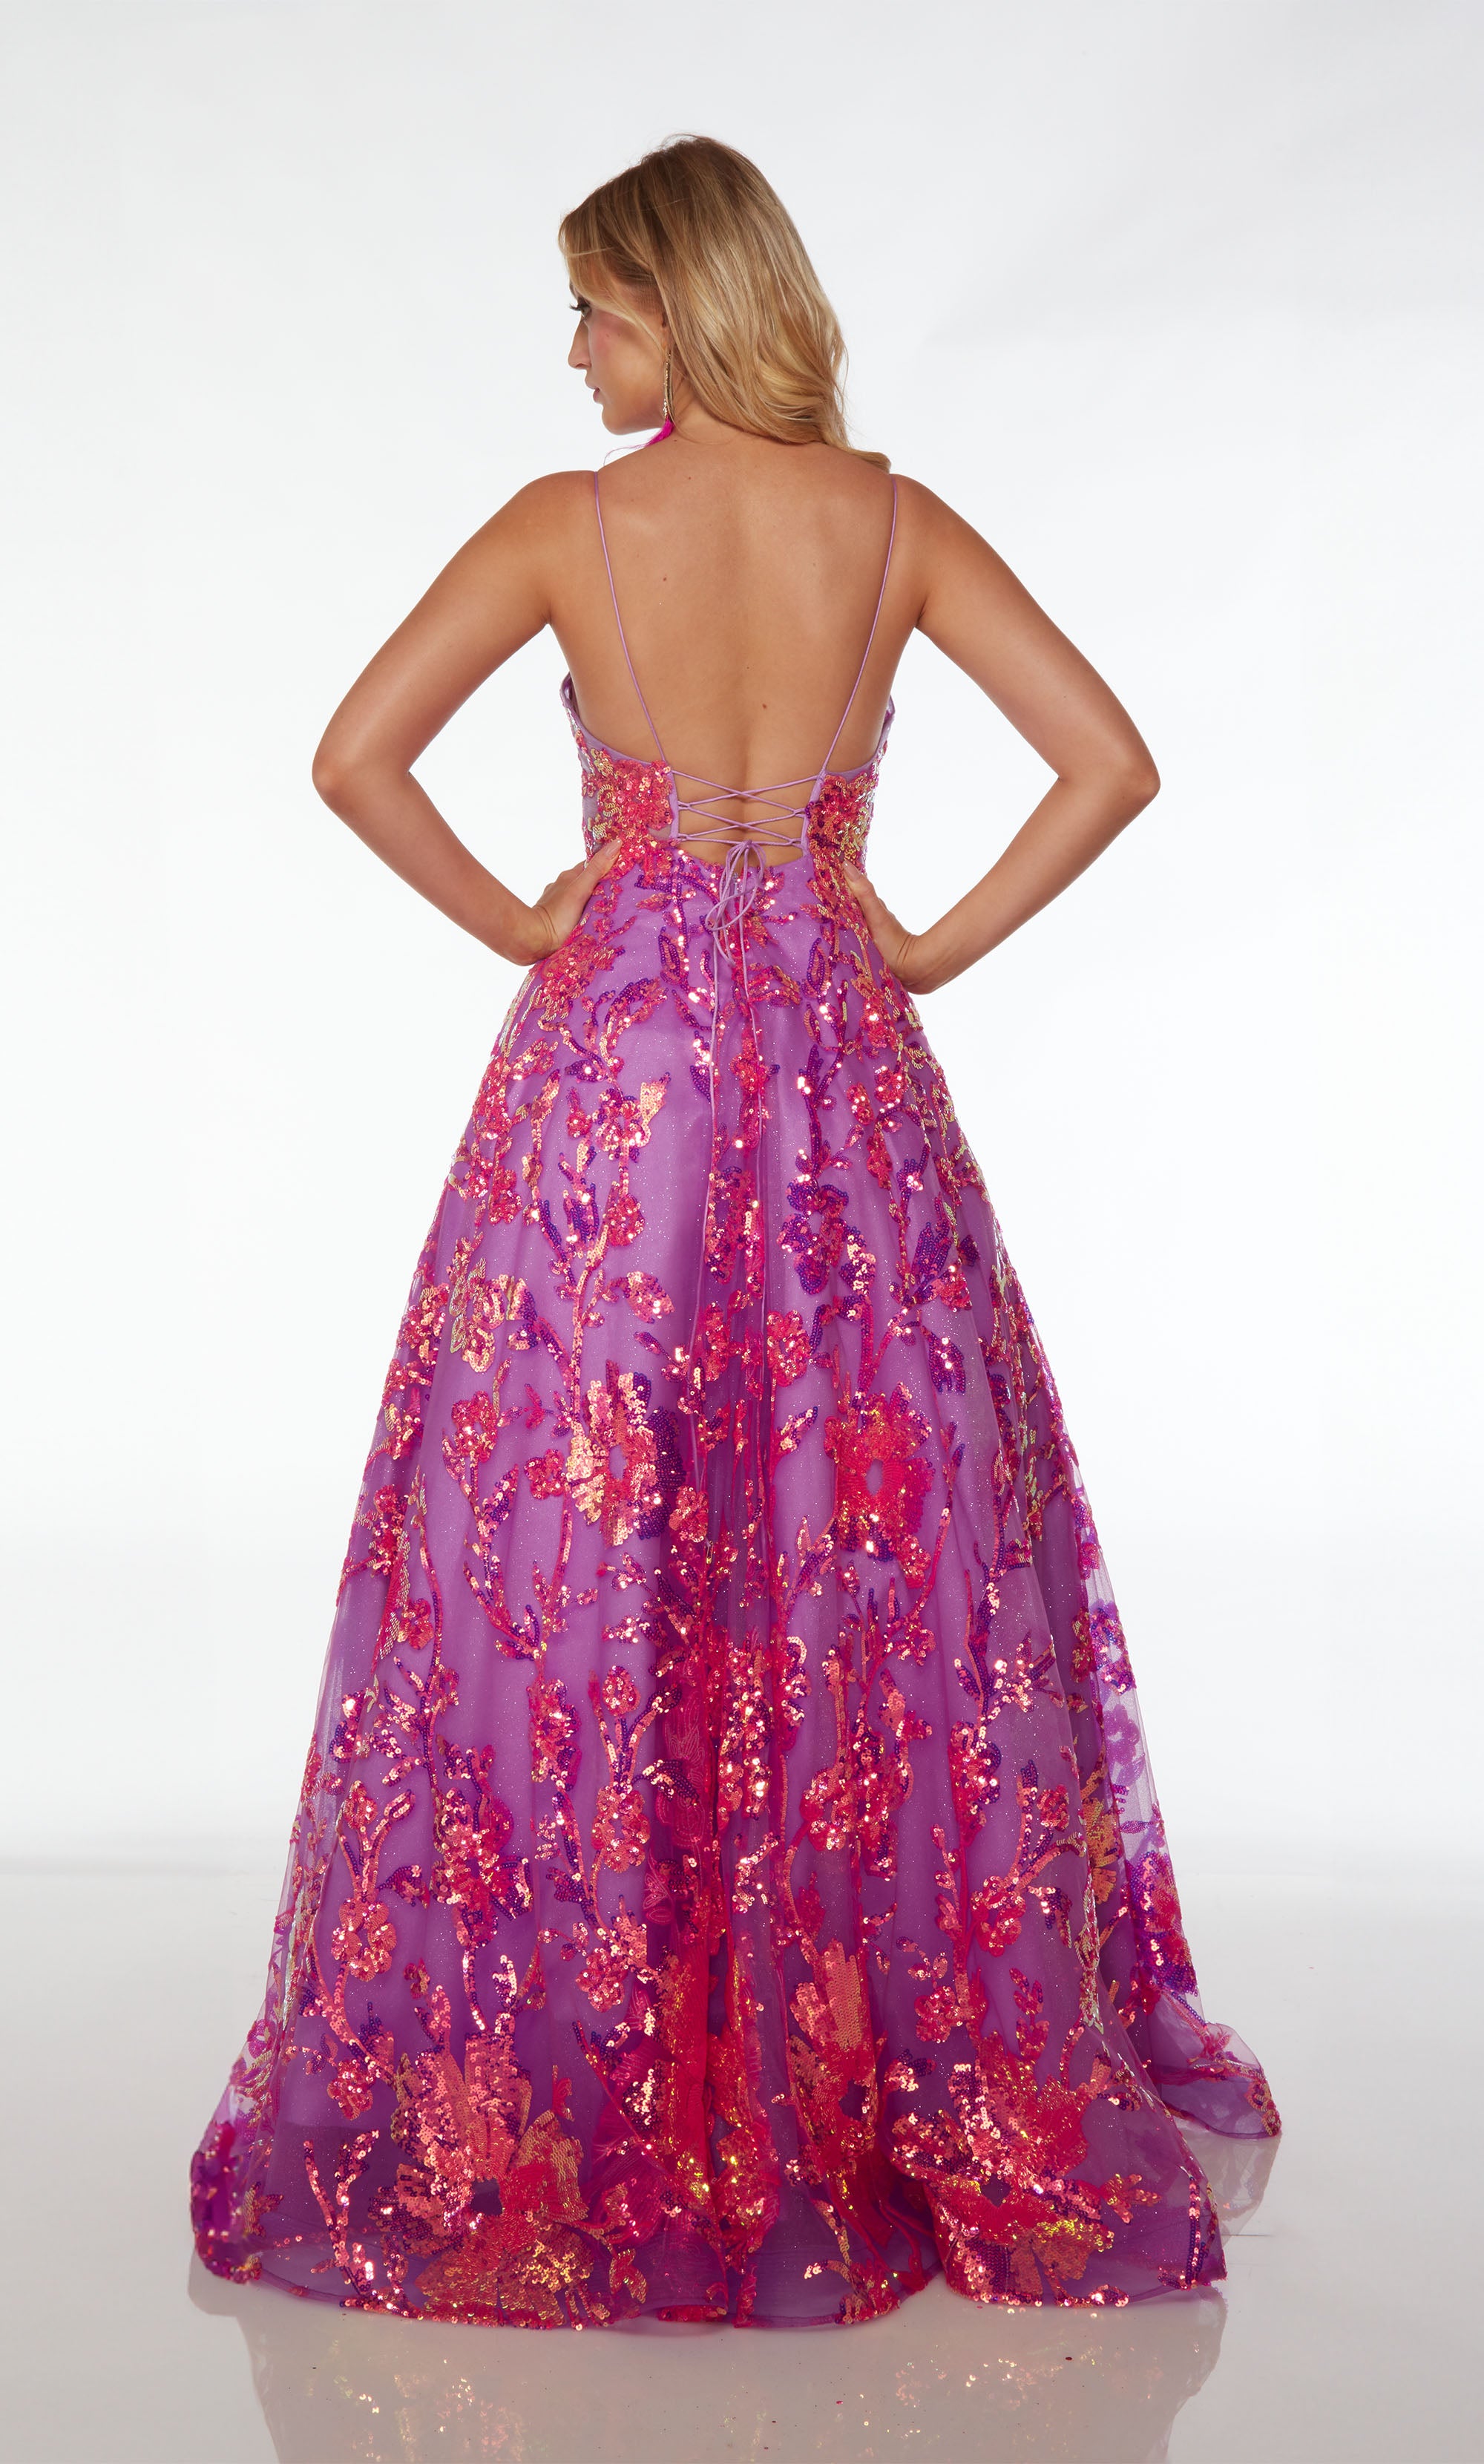 Purple-pink ball gown with an V-neckline, lace-up back, and adorned with beautiful iridescent sequin flowers, creating an enchanting and glamorous look.